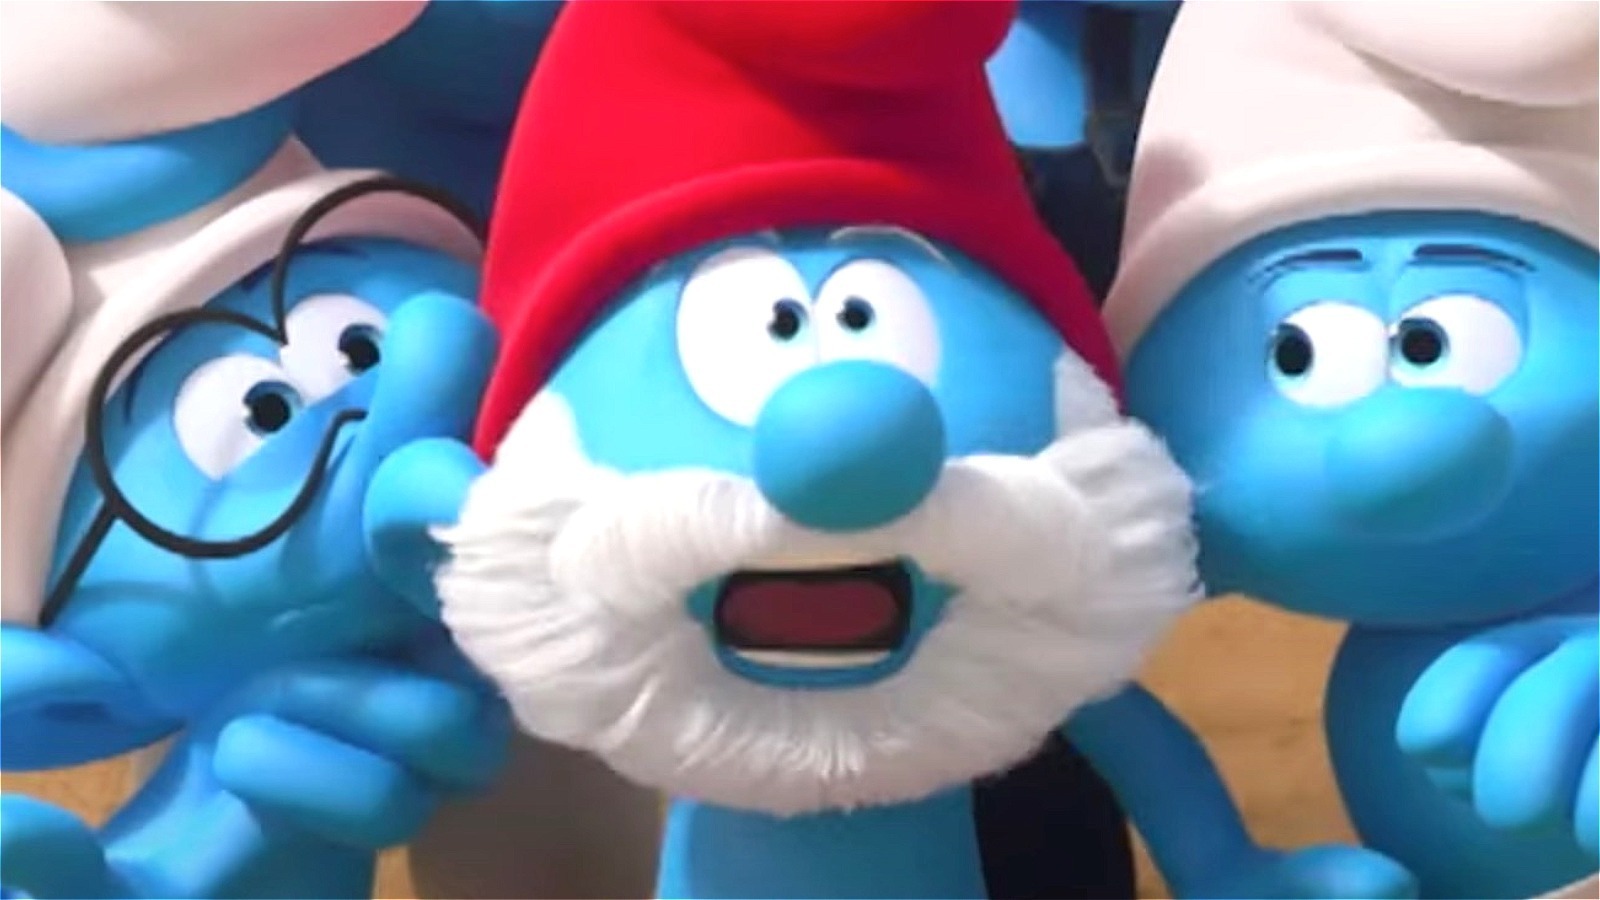 6. "The Smurfs" - wide 7